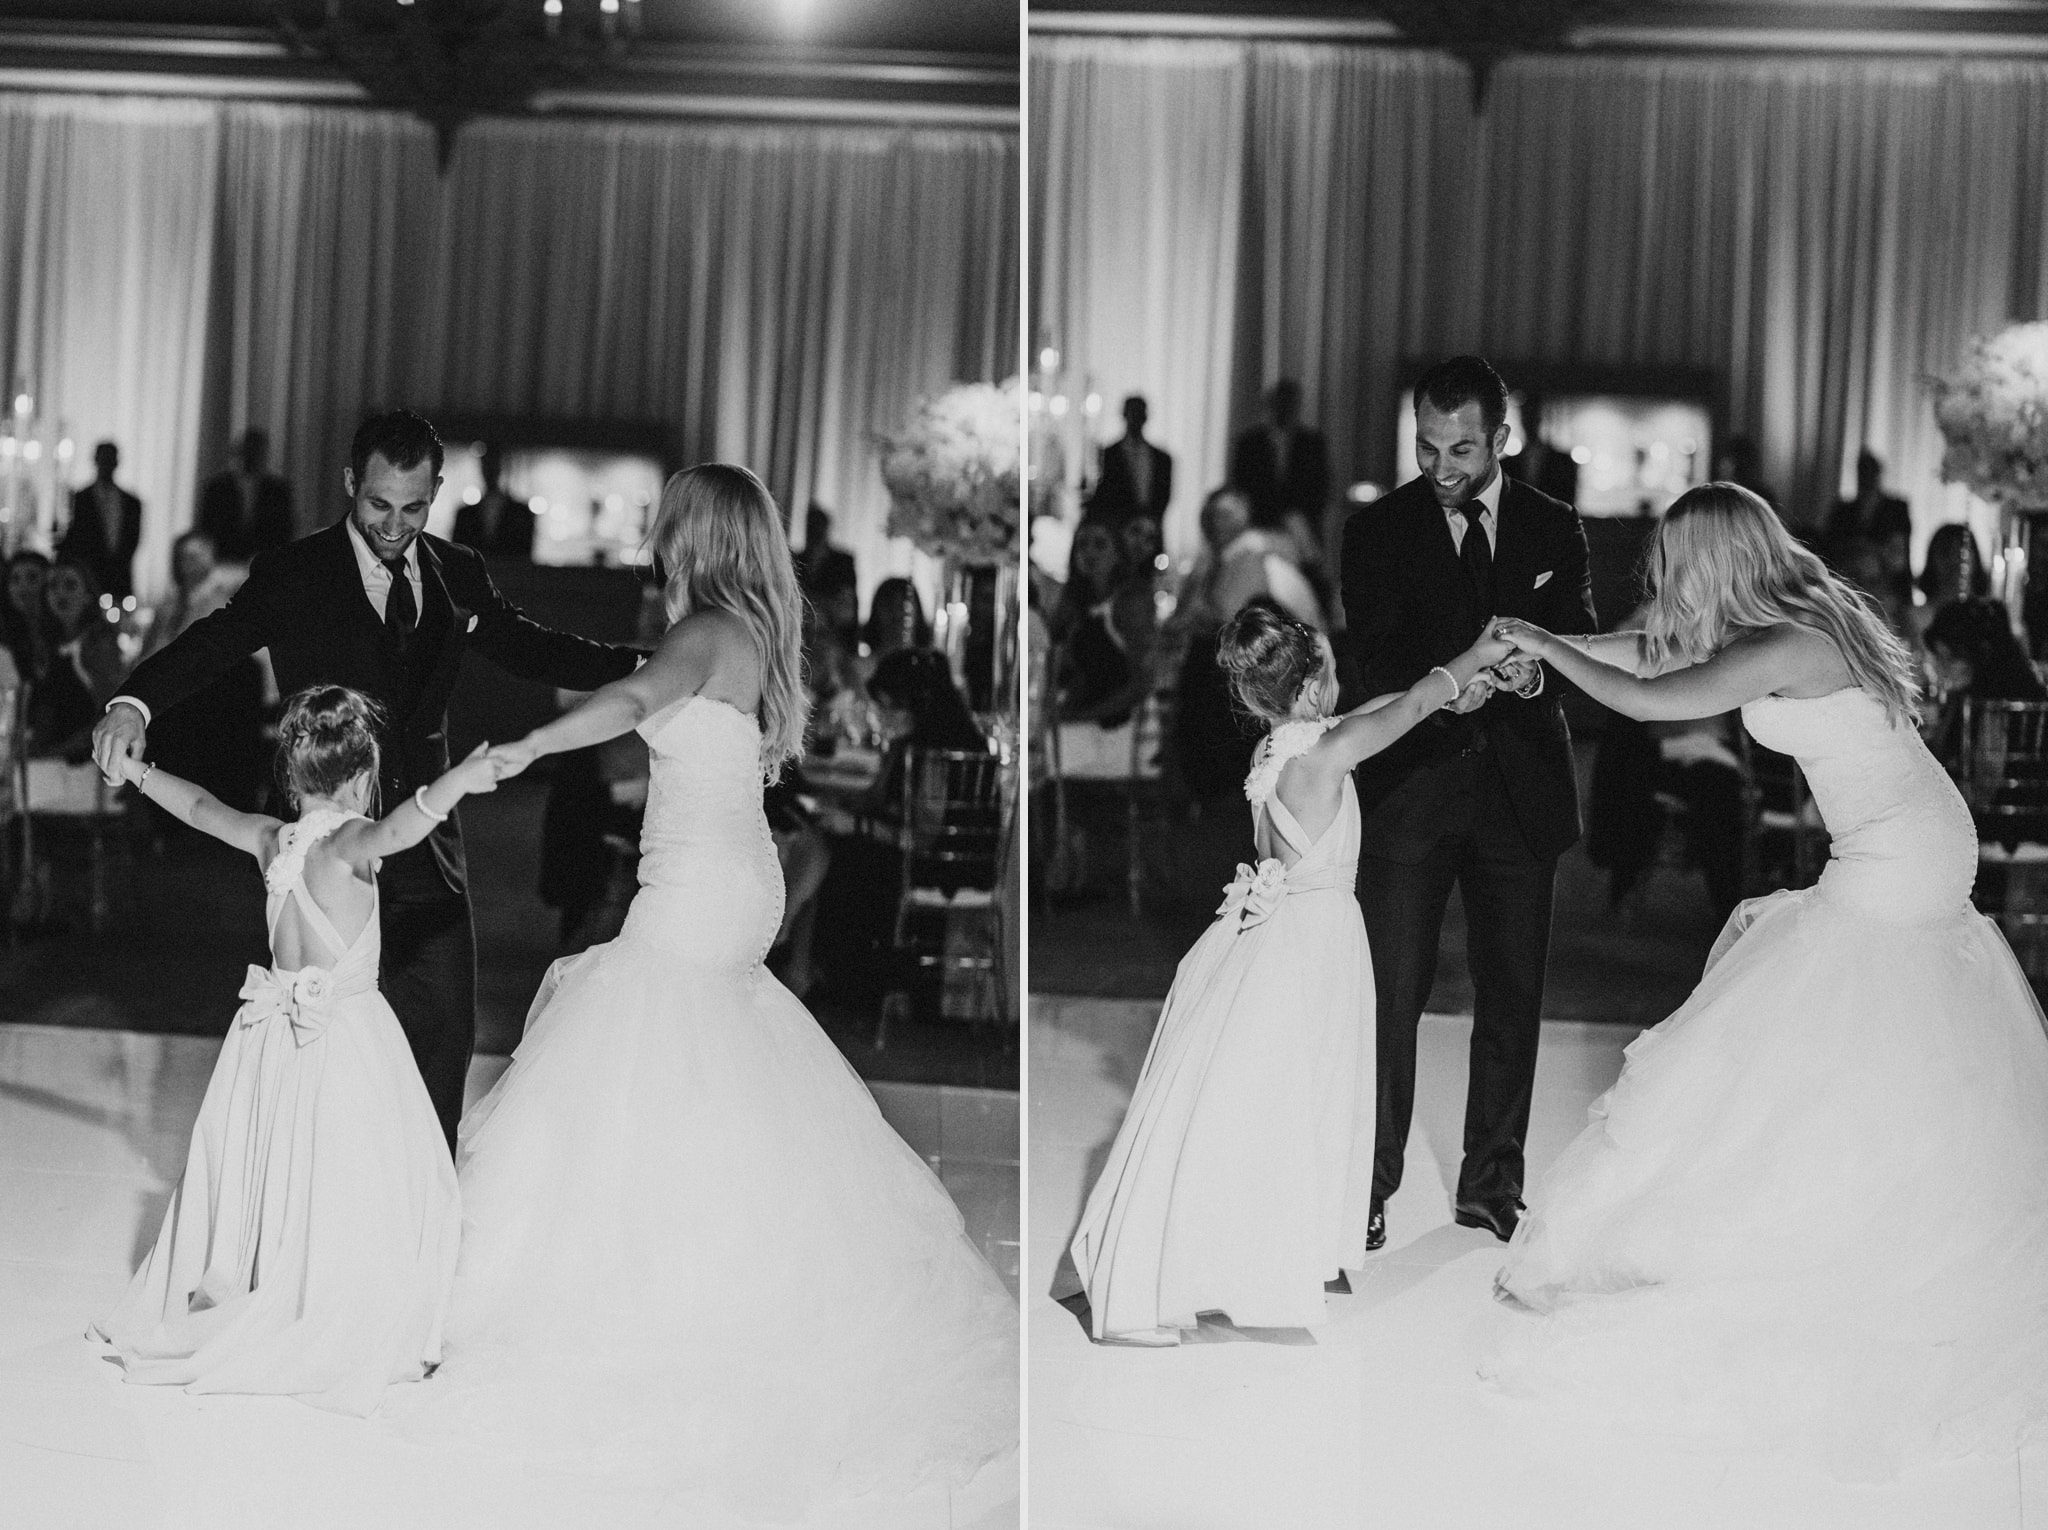 A bride and groom dance with the flower girl at their beautiful wedding reception at Pelican Hill Resort.